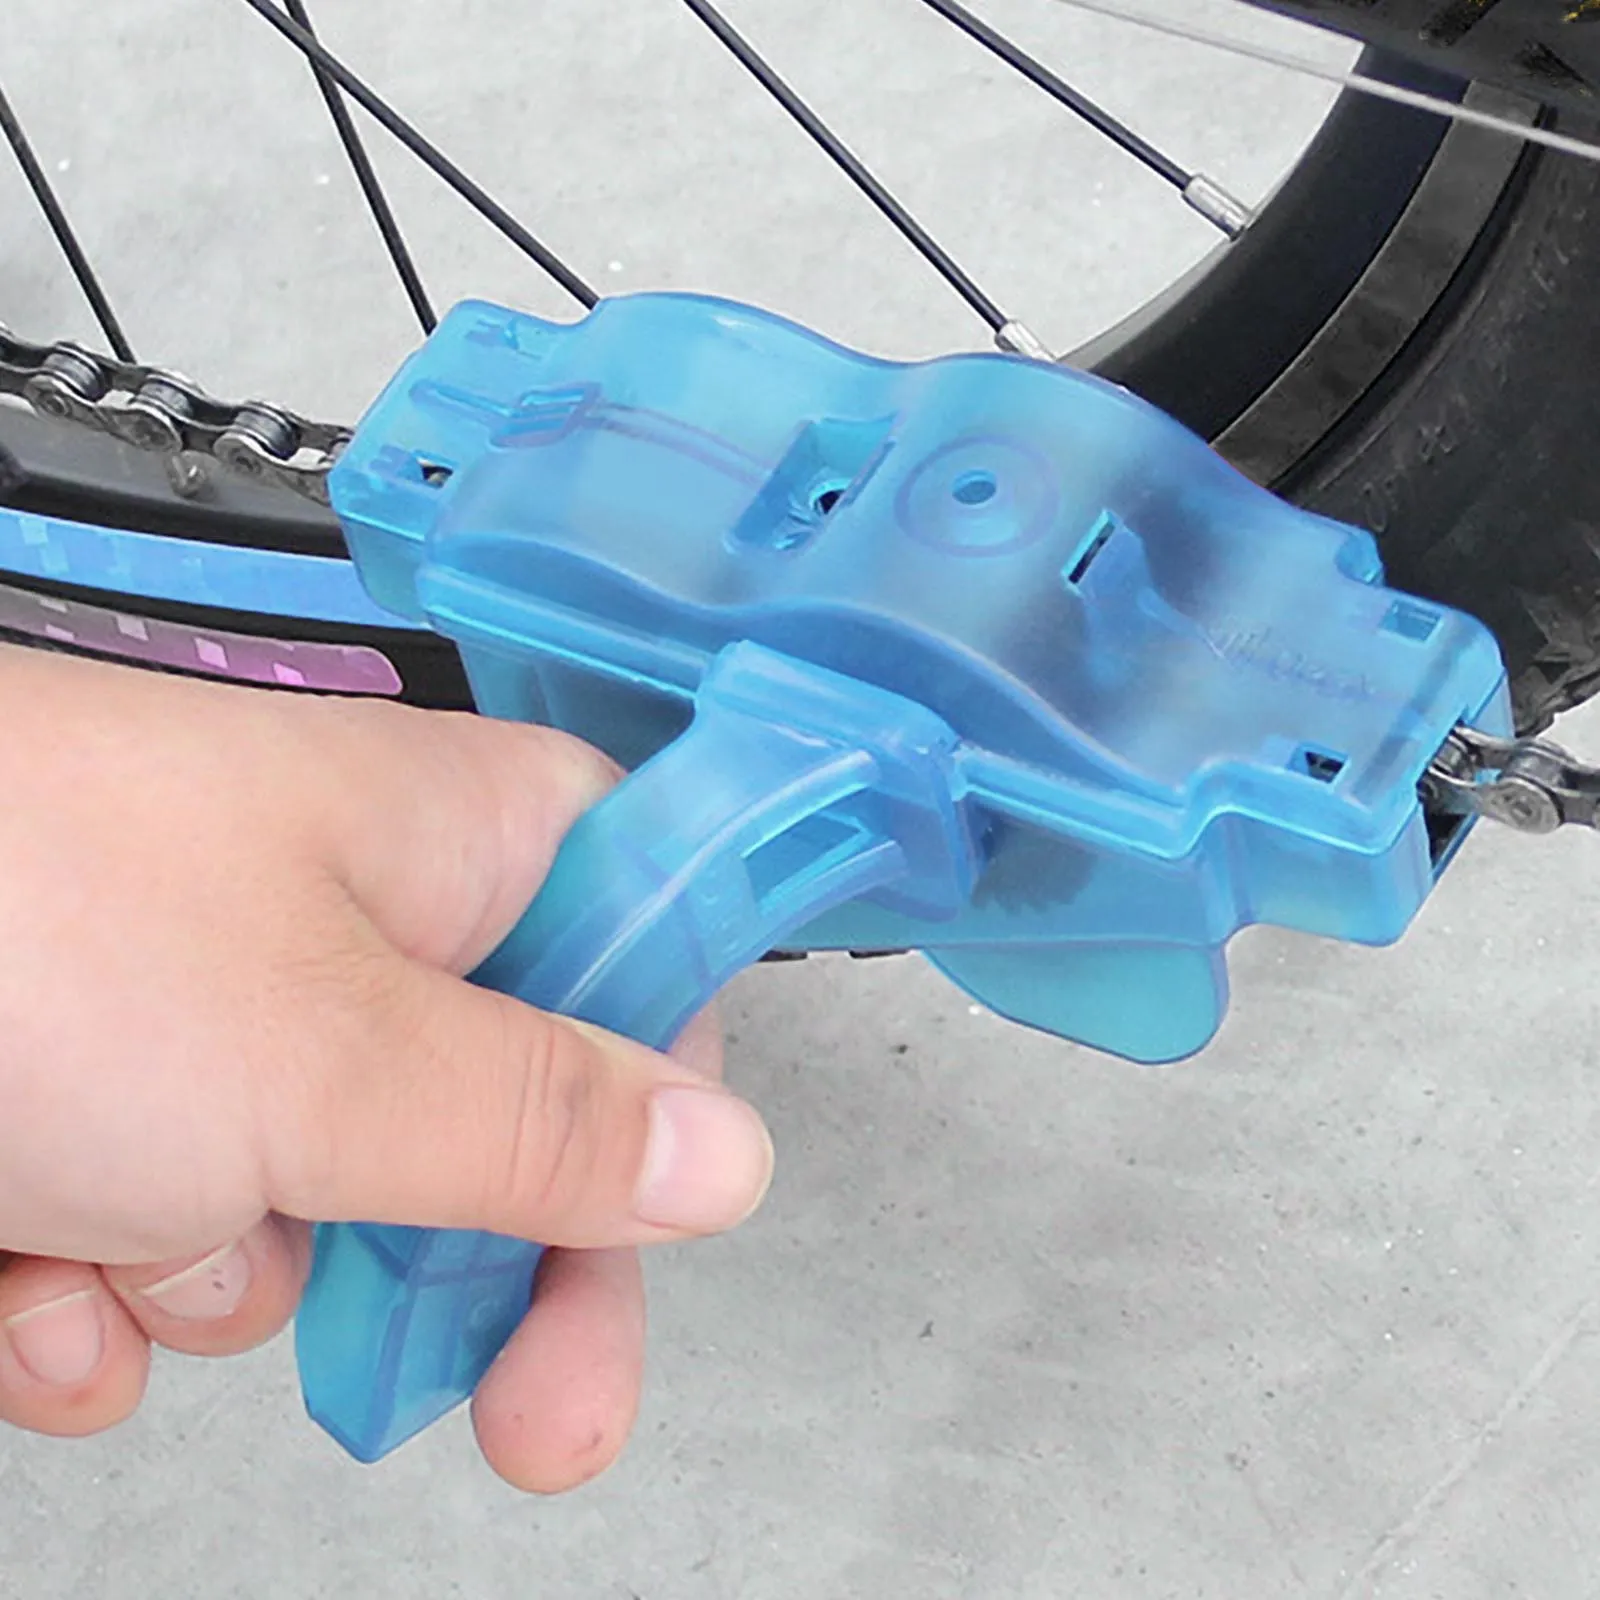 CRAZY STONE 4PCS Portable Bicycle Chain Scrubber Chain Brush Chain Gear Maintenance Tools Mountain Bikes Cycling Bikes Road Bikes Bicycle Cleaning kit 